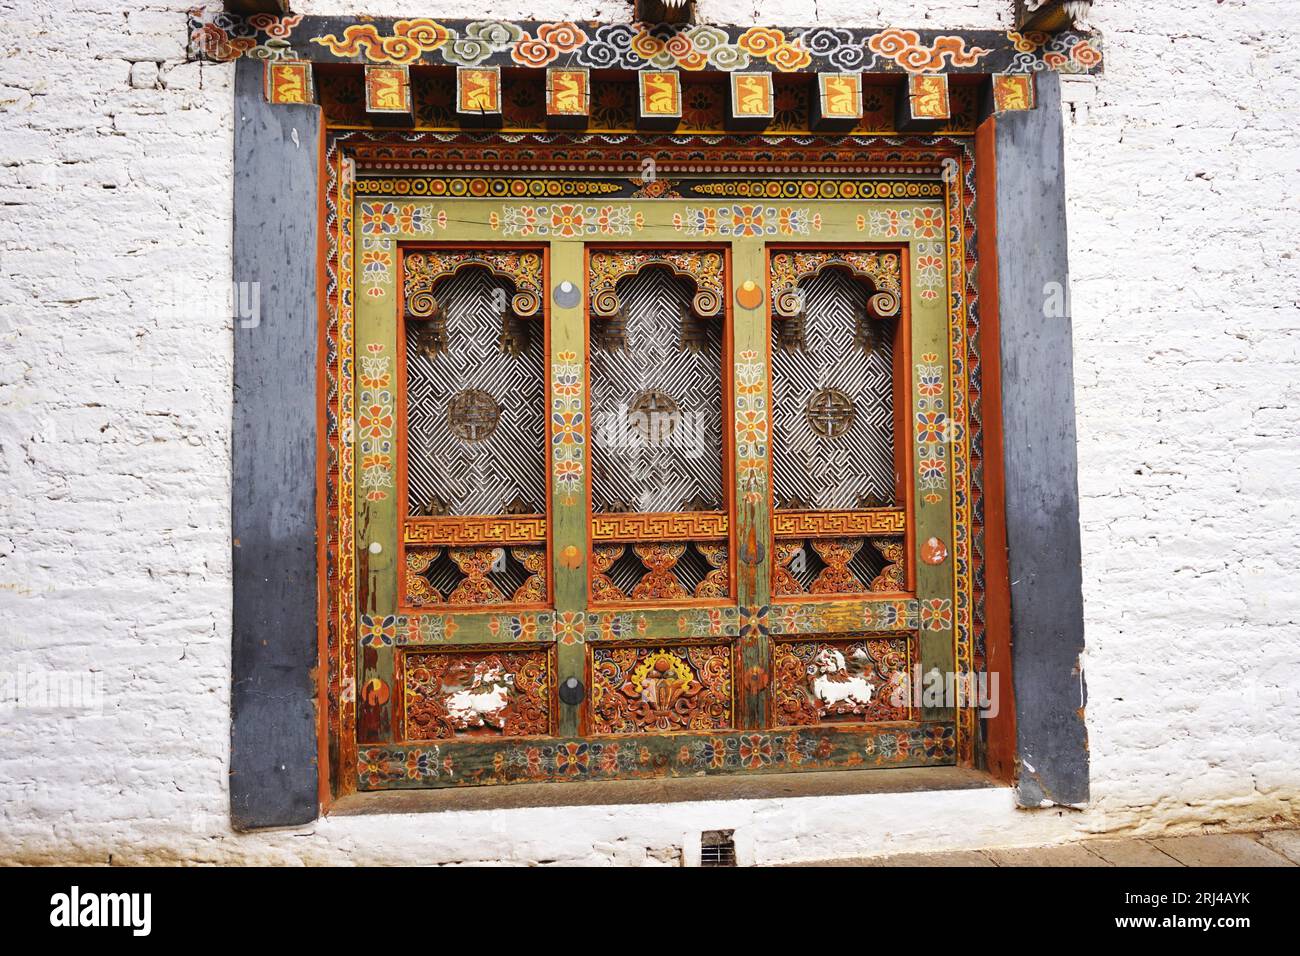 Detail of traditional decorative carved, painted wooden panels with heavy timber frame, set in white stone wall at Punakha Dzong, Kingdom of Bhutan Stock Photo